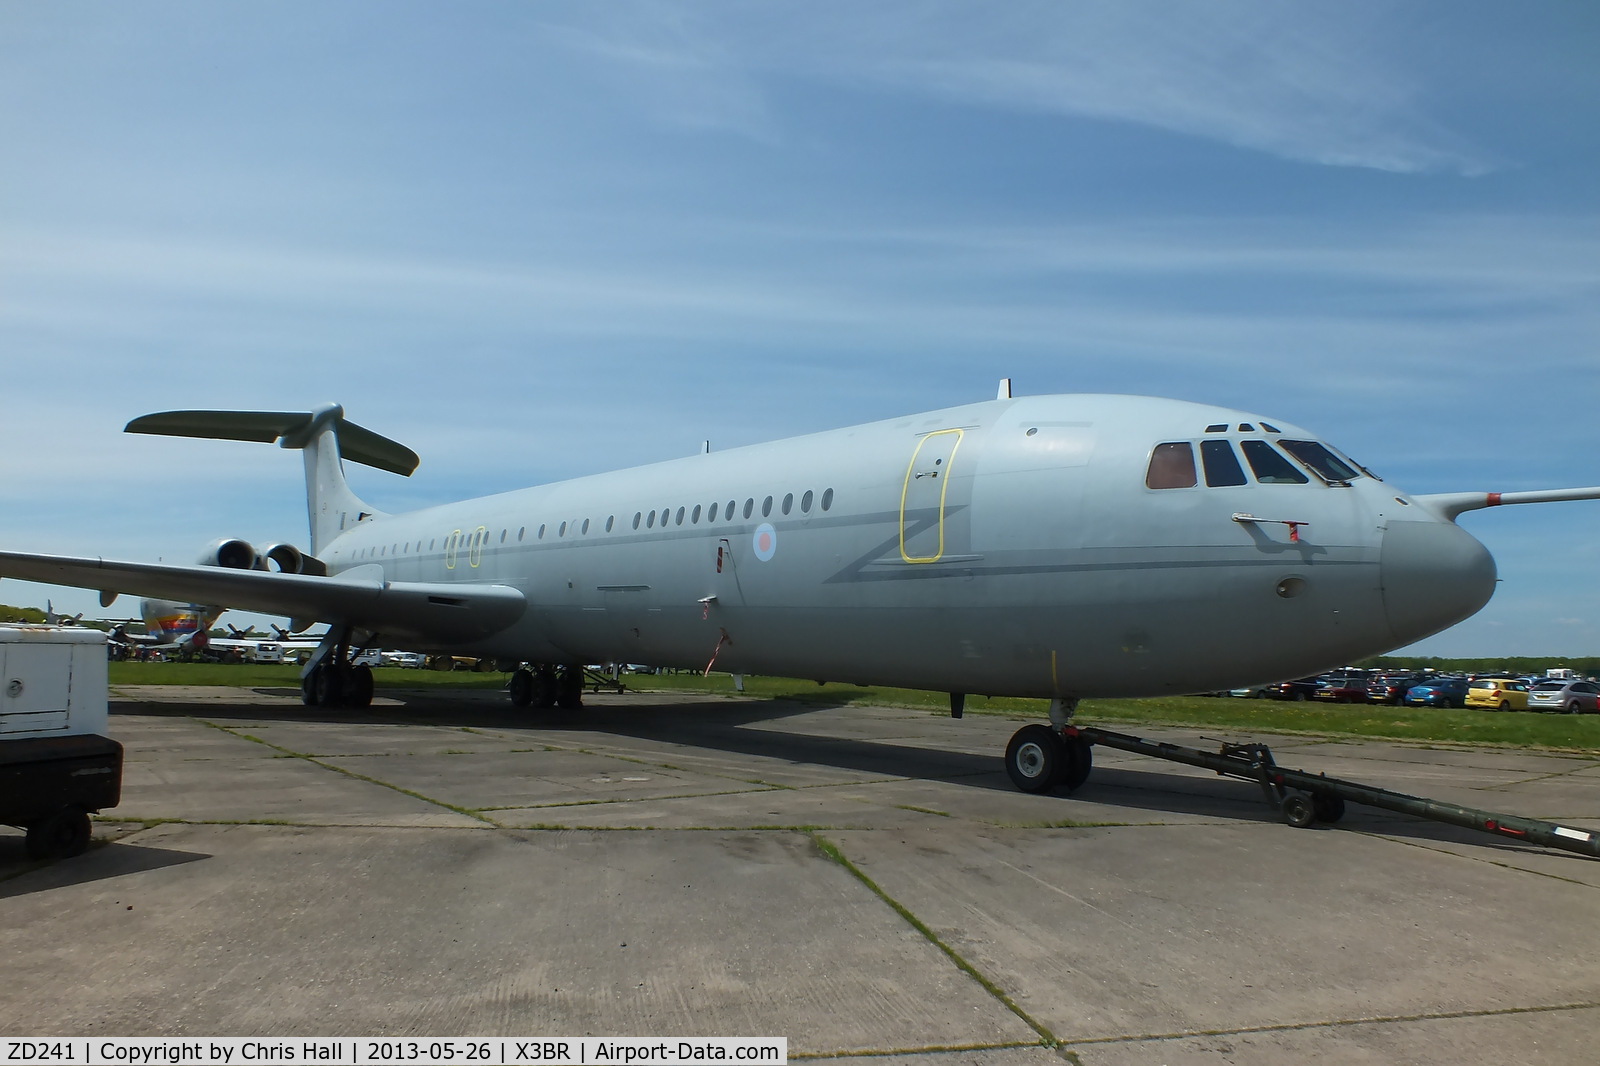 ZD241, 1968 Vickers Super VC10 K.4 C/N 863, at the Cold War Jets open day, Bruntingthorpe